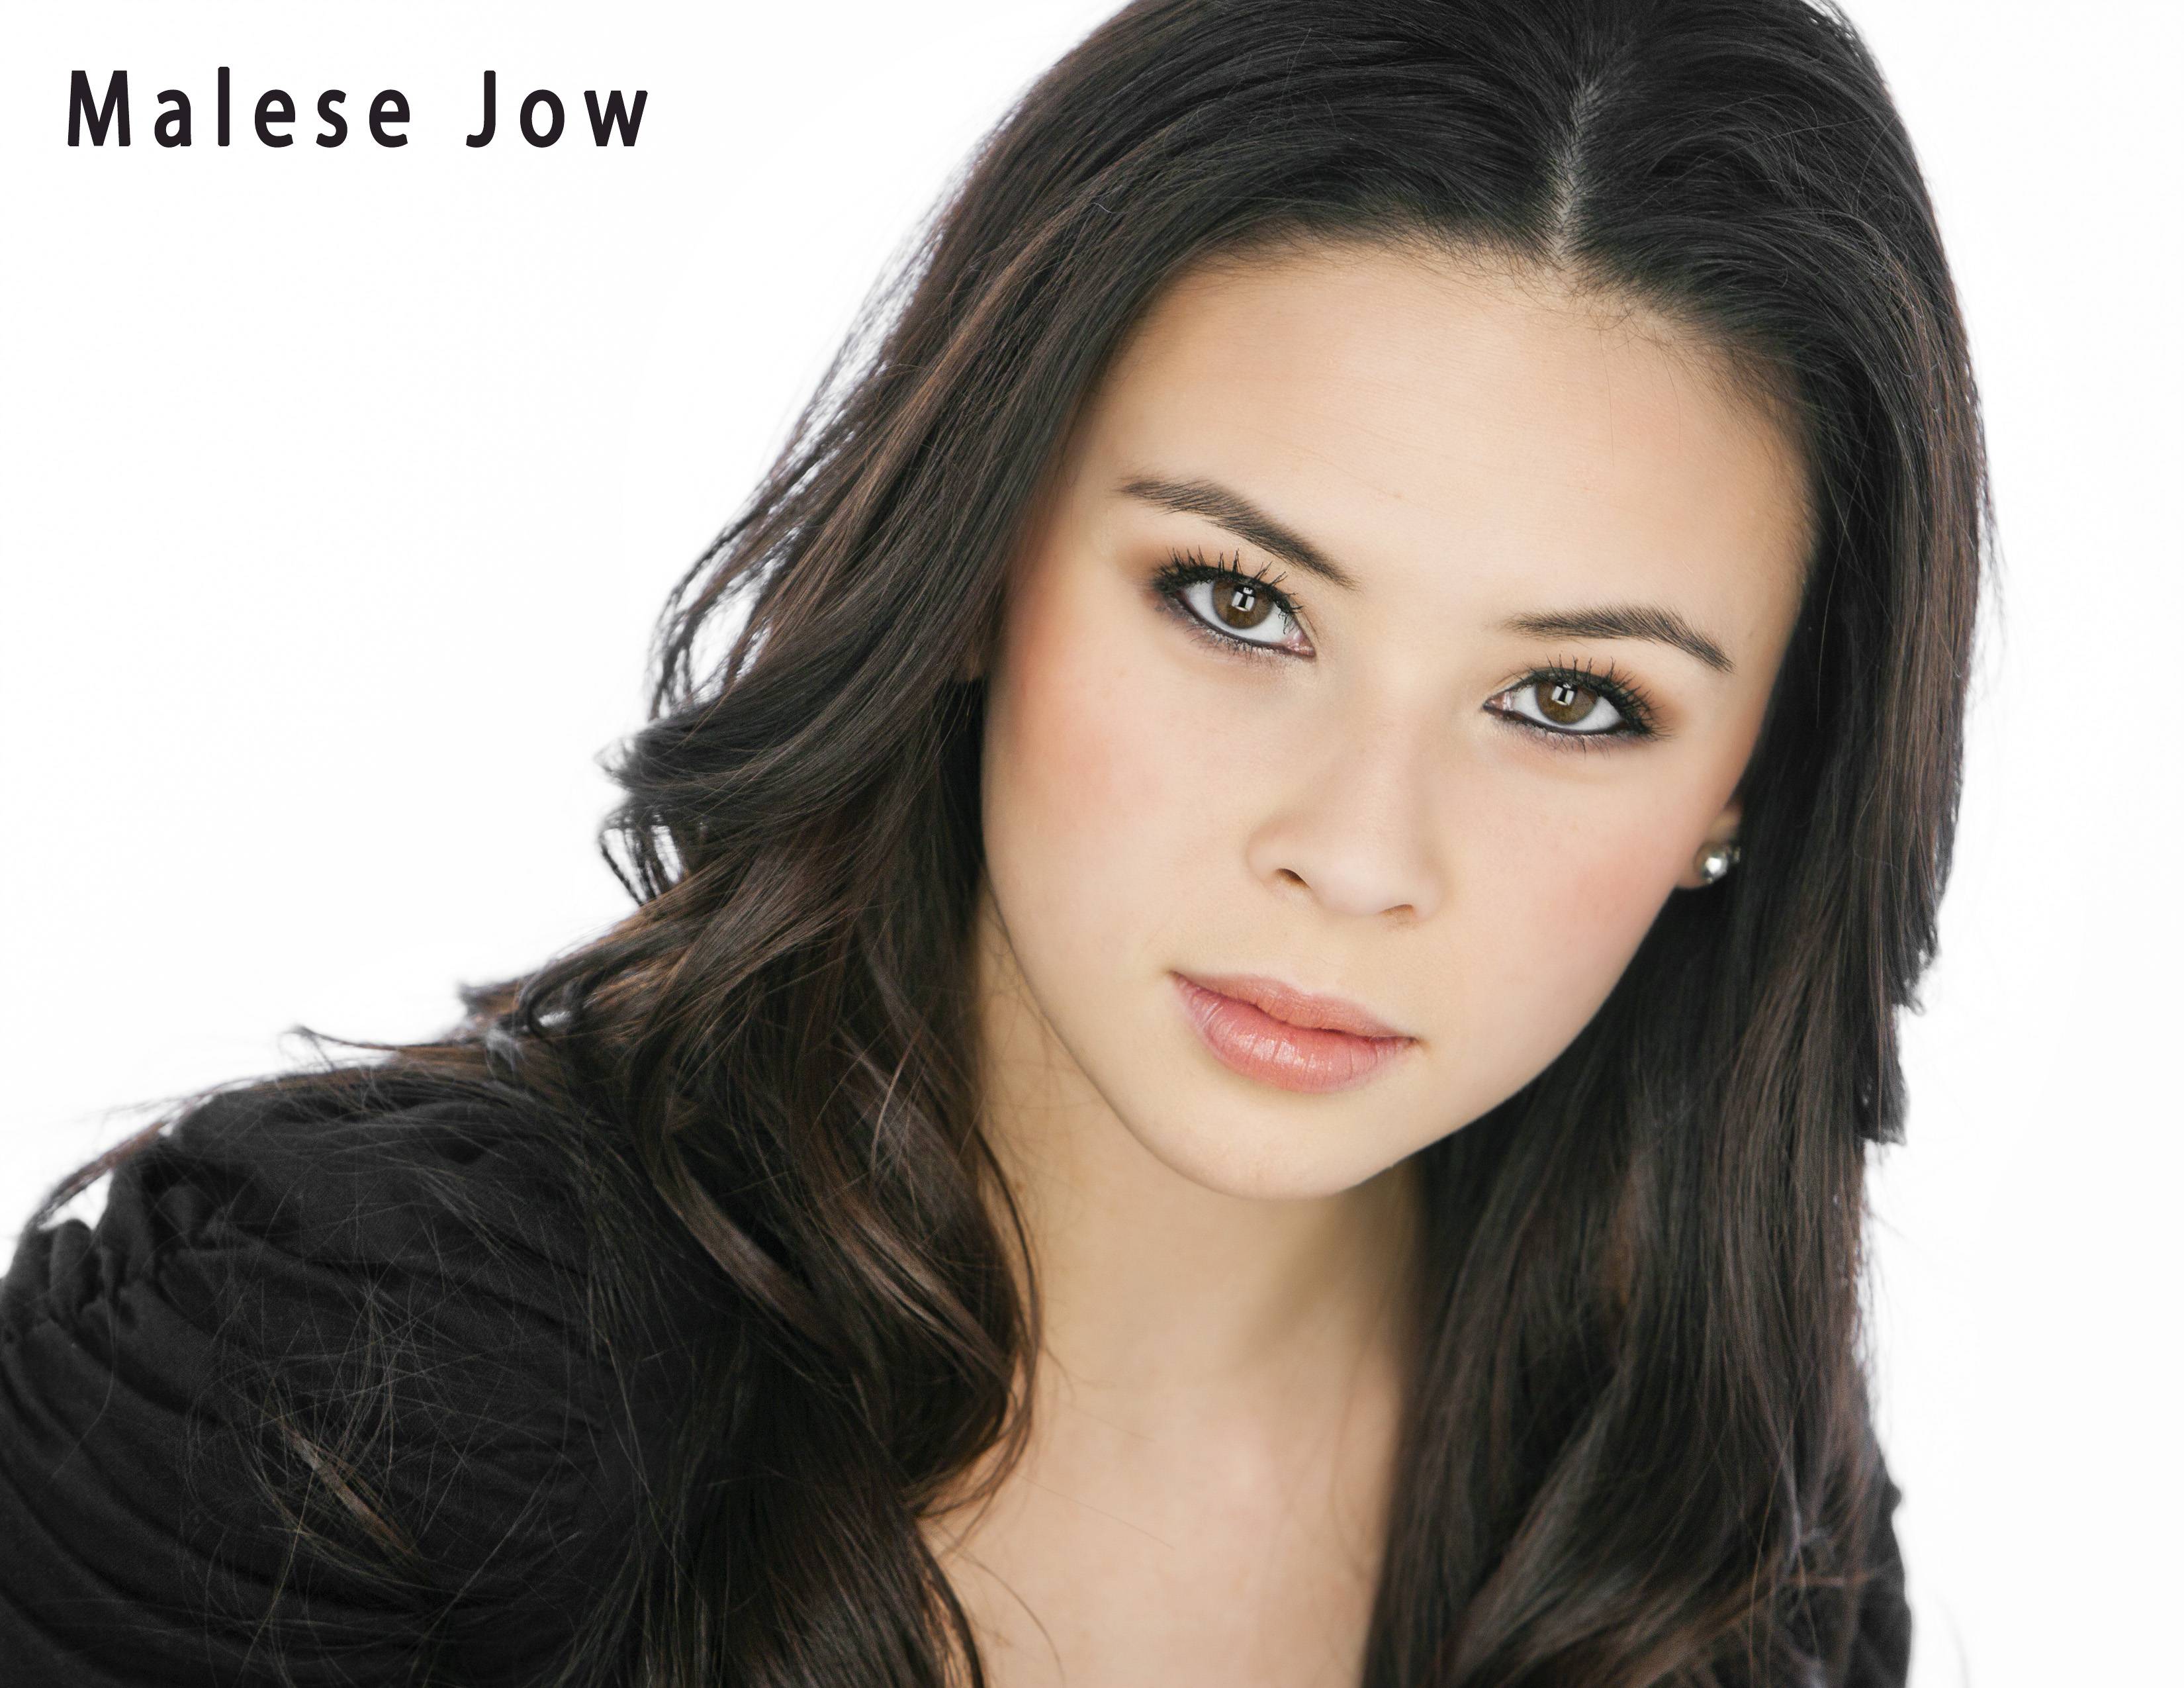 Jow photoshoot malese Malese Jow